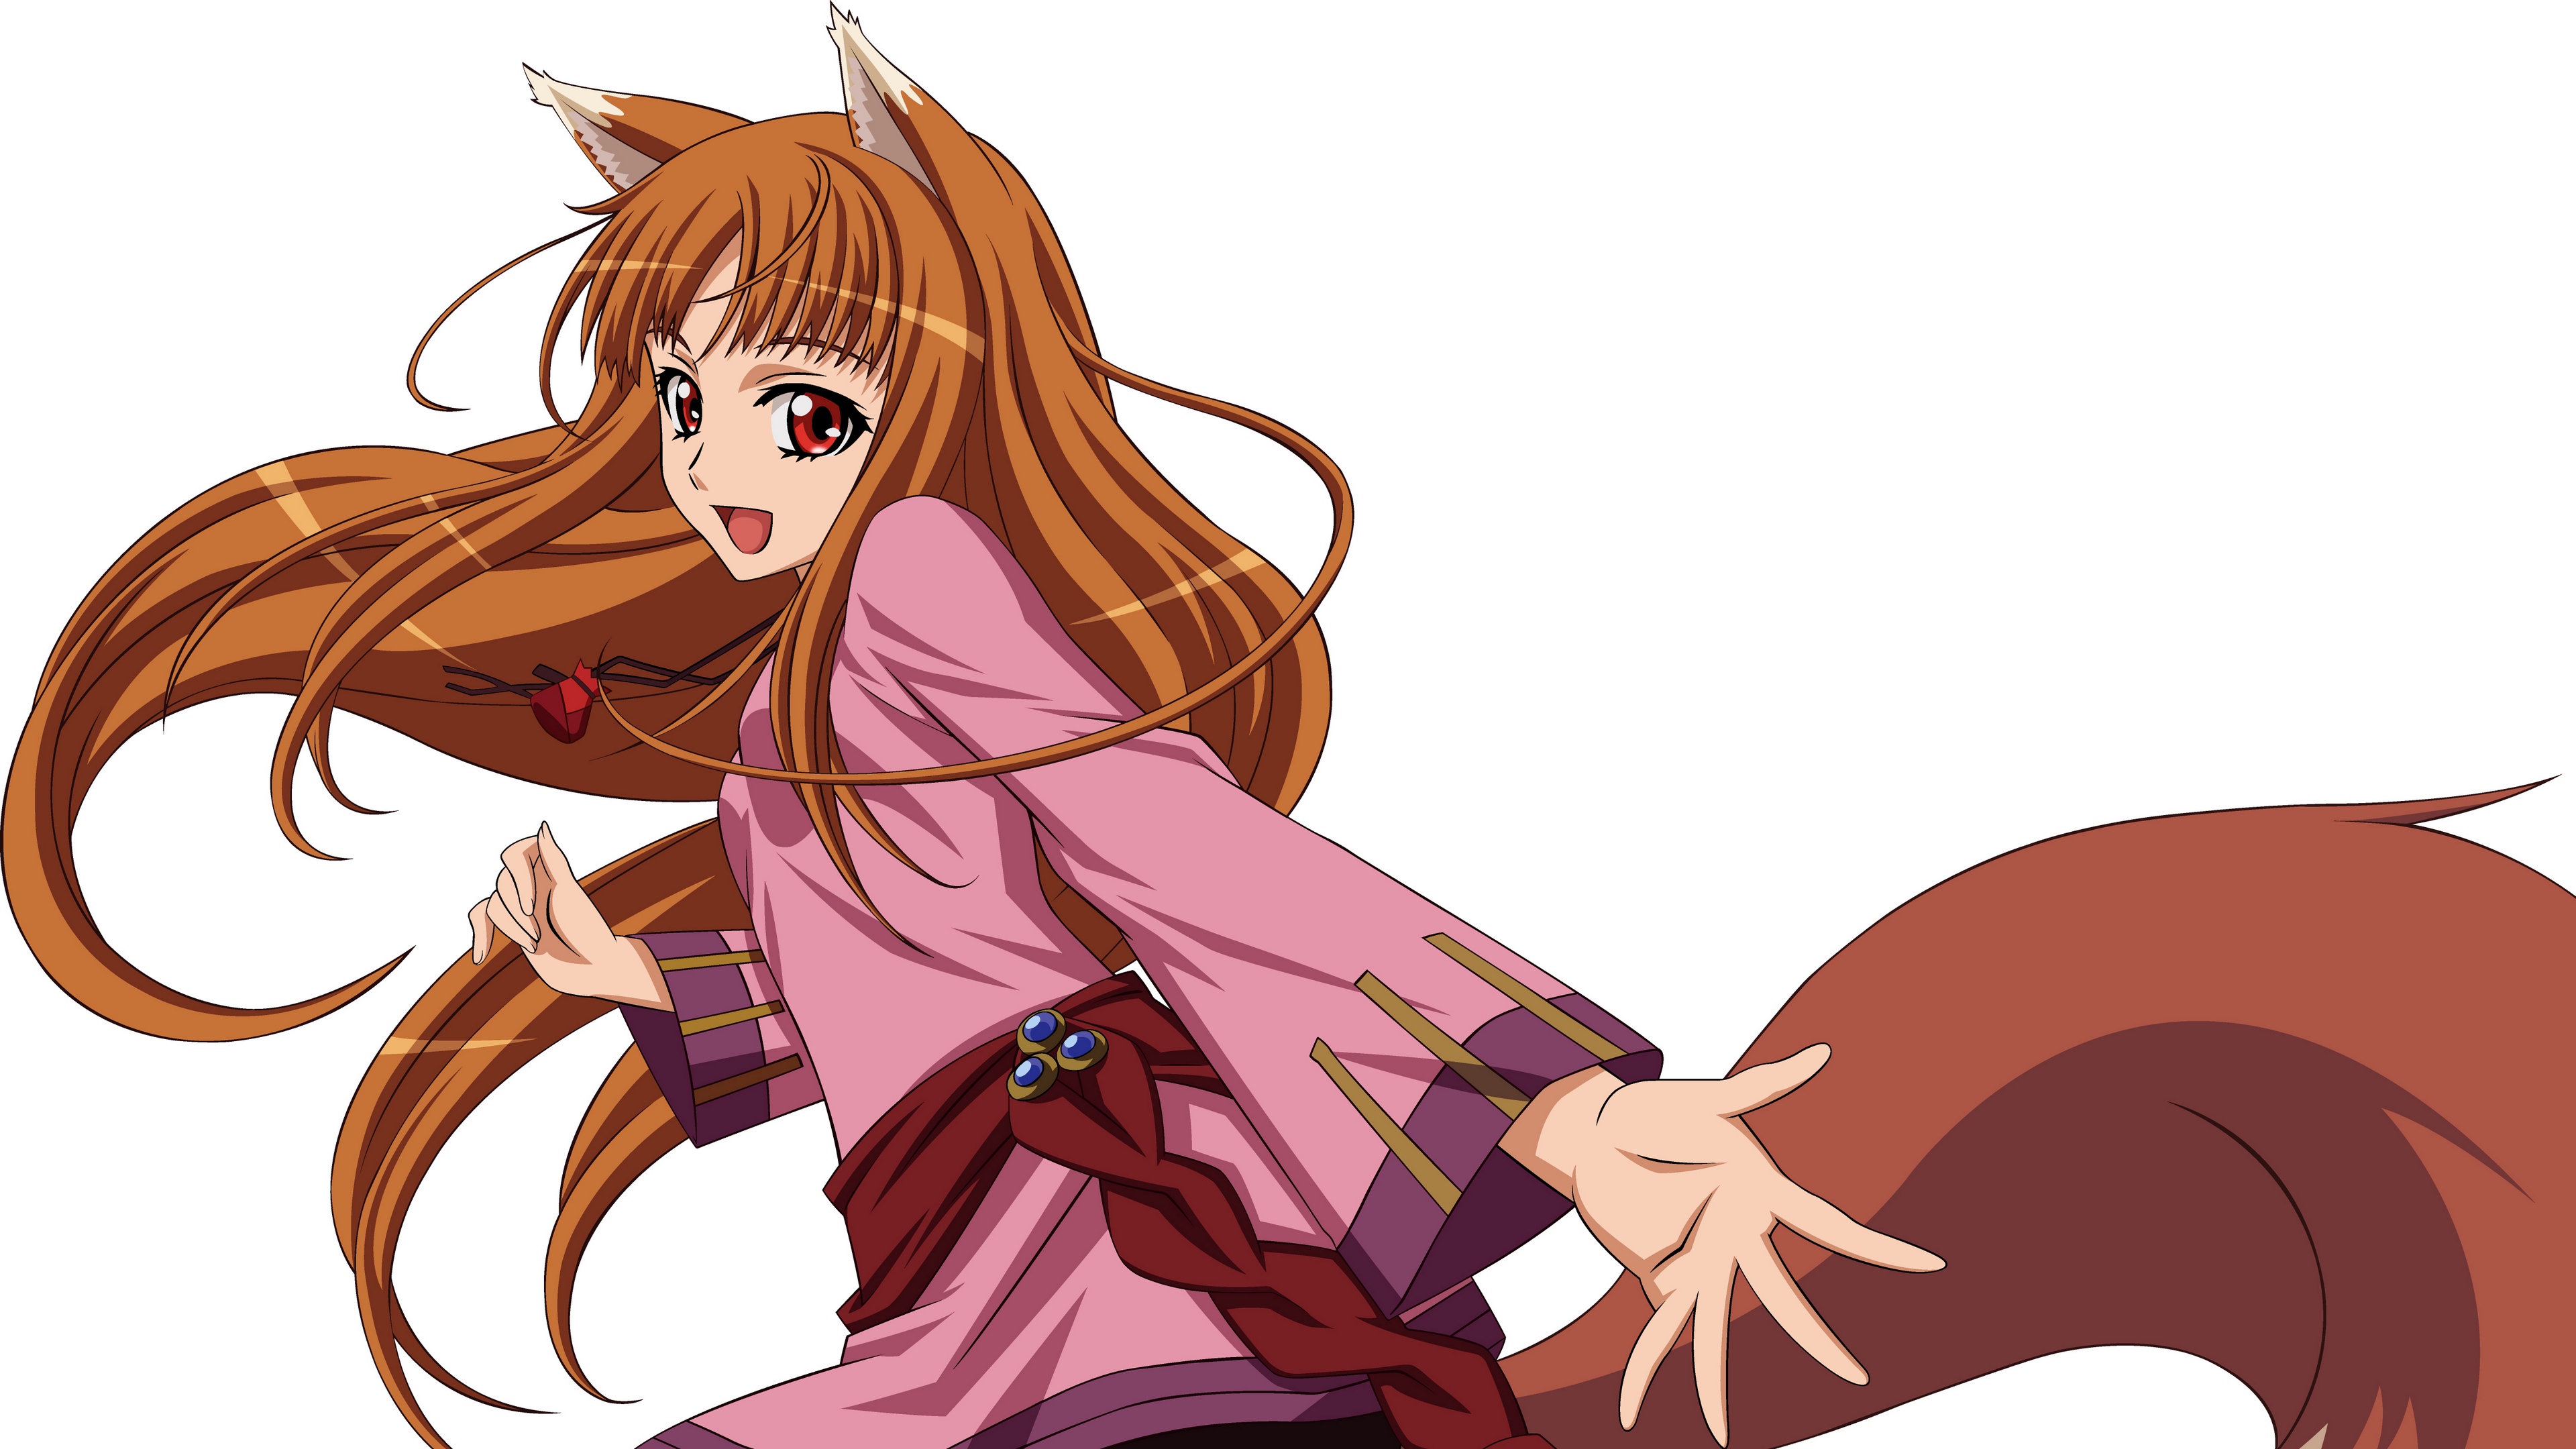 spice and wolf horo girl fox 4k 1541975642 - spice and wolf, horo, girl, fox 4k - spice and wolf, horo, Girl